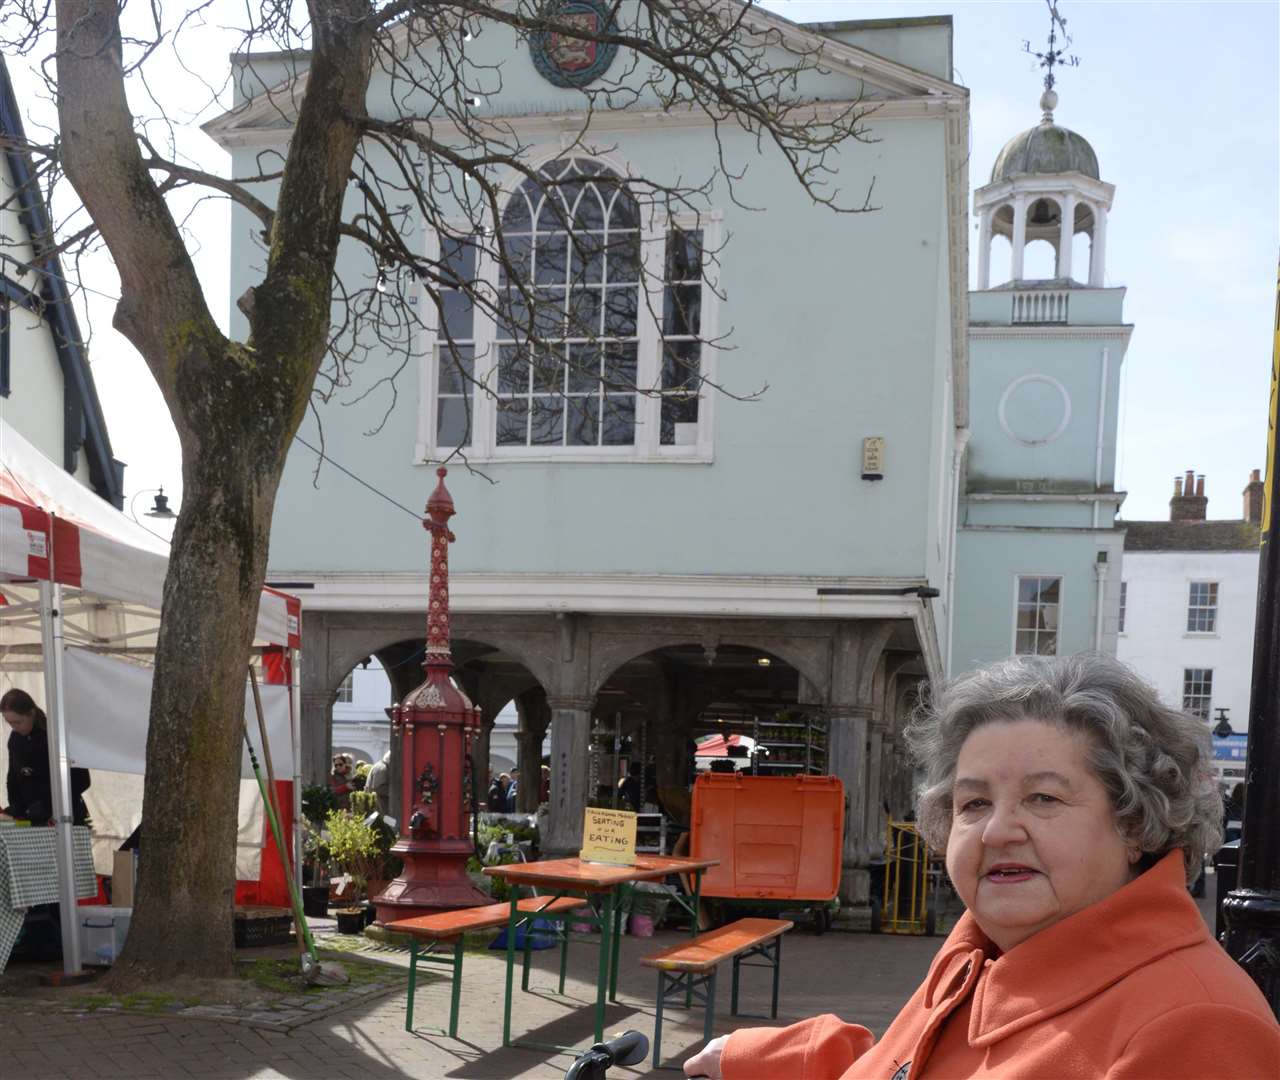 Anita Walker was born and raised in Faversham and spent her life fighting to make the town better. Here, she is pictured campaigning for more benches in the town centre in 2017